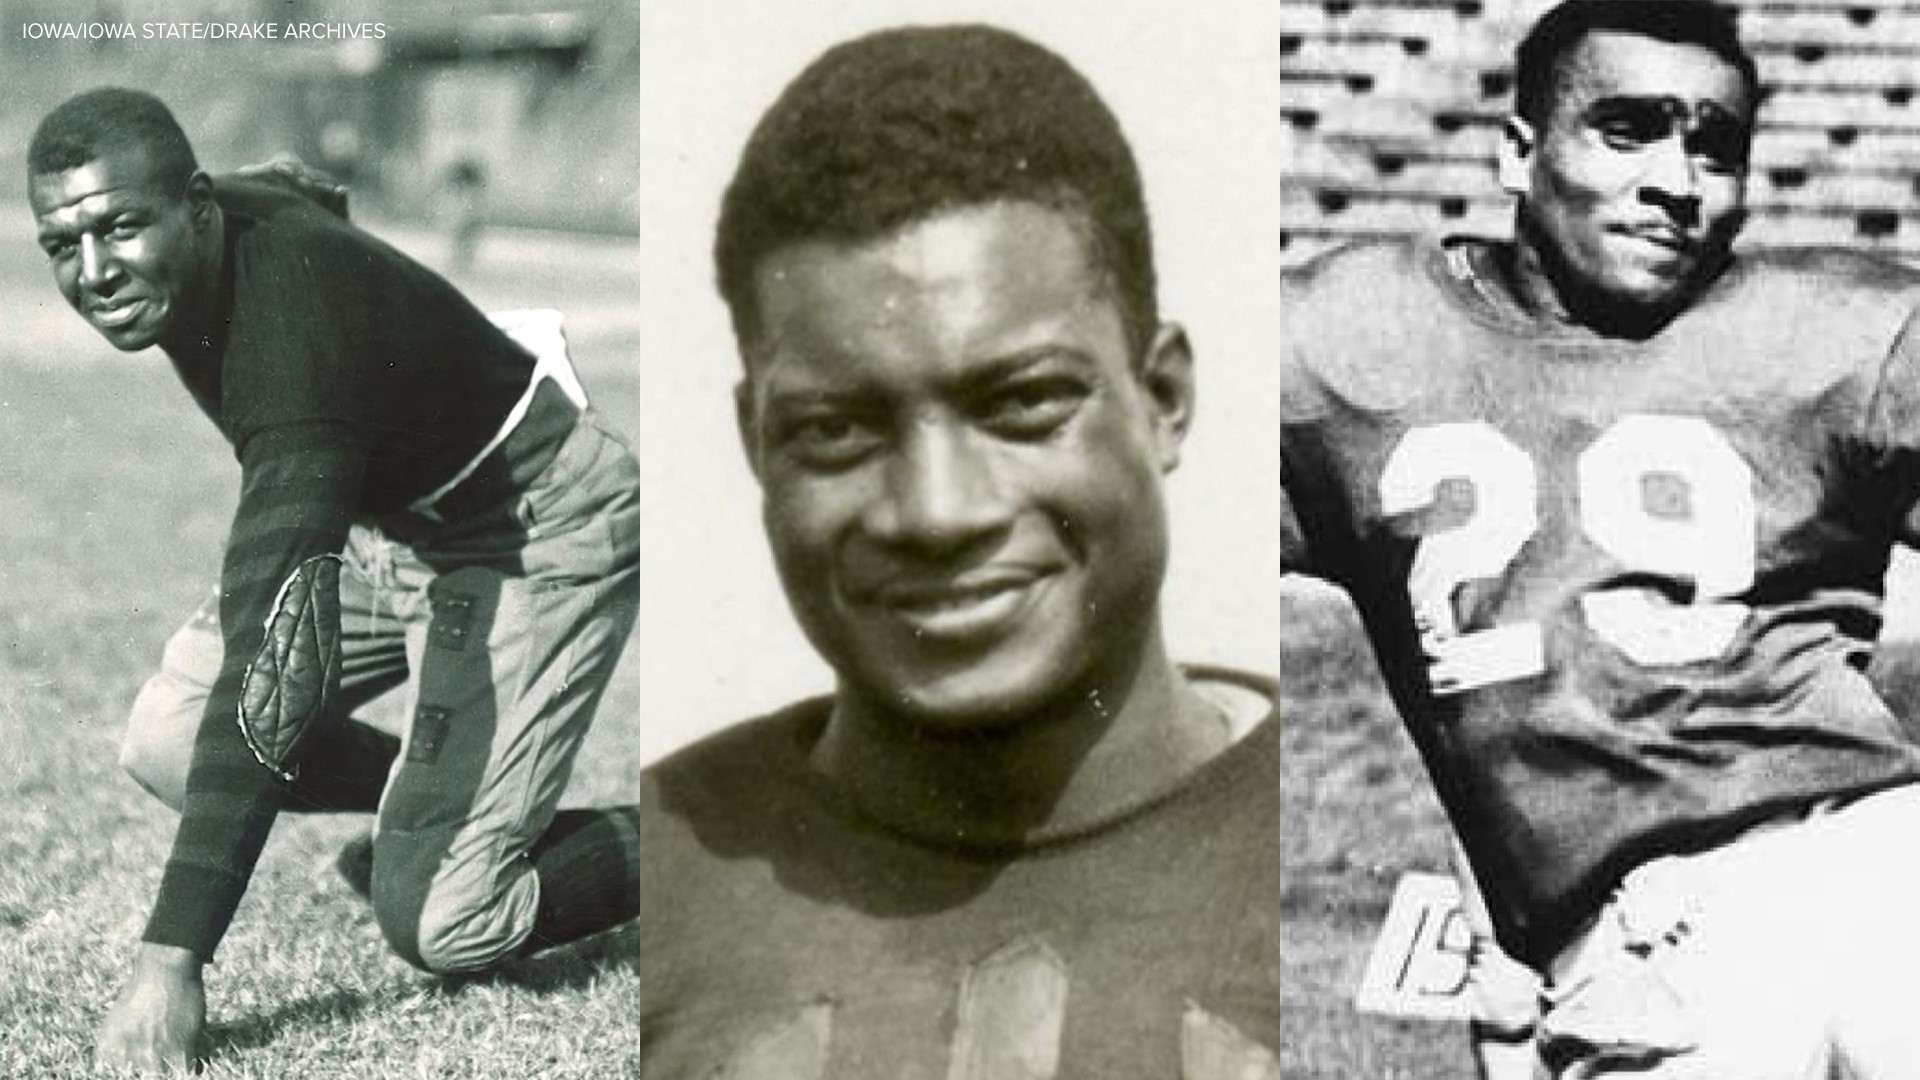 Local 5 Sports Director Reina Garcia takes a closer look at the lives and legacies — both on and off the field — of three pivotal Black athletes in Iowa history.